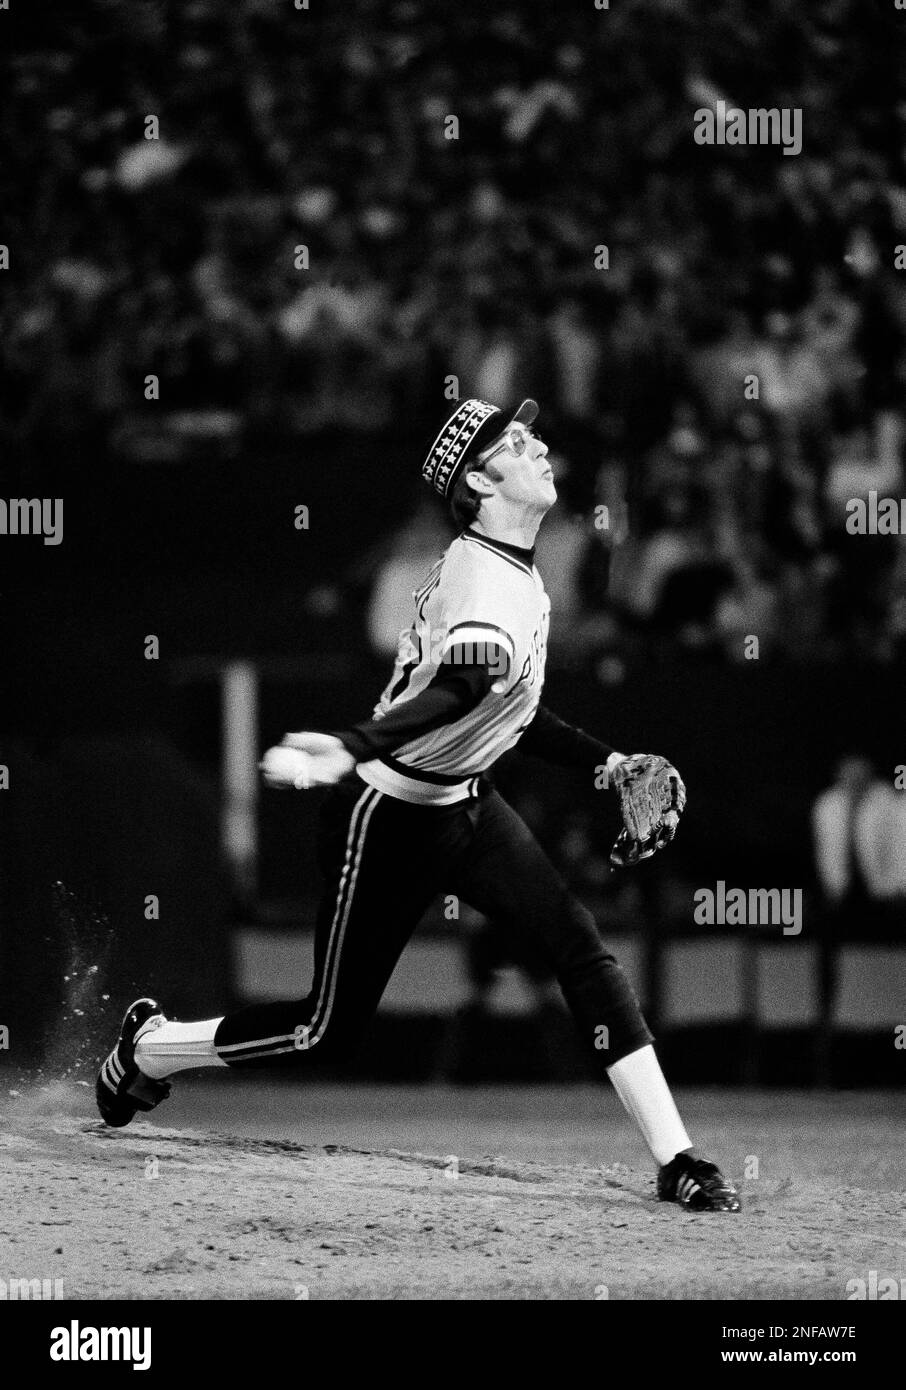 Pittsburgh Pirates' pitcher Kent Tekulve pitches against the